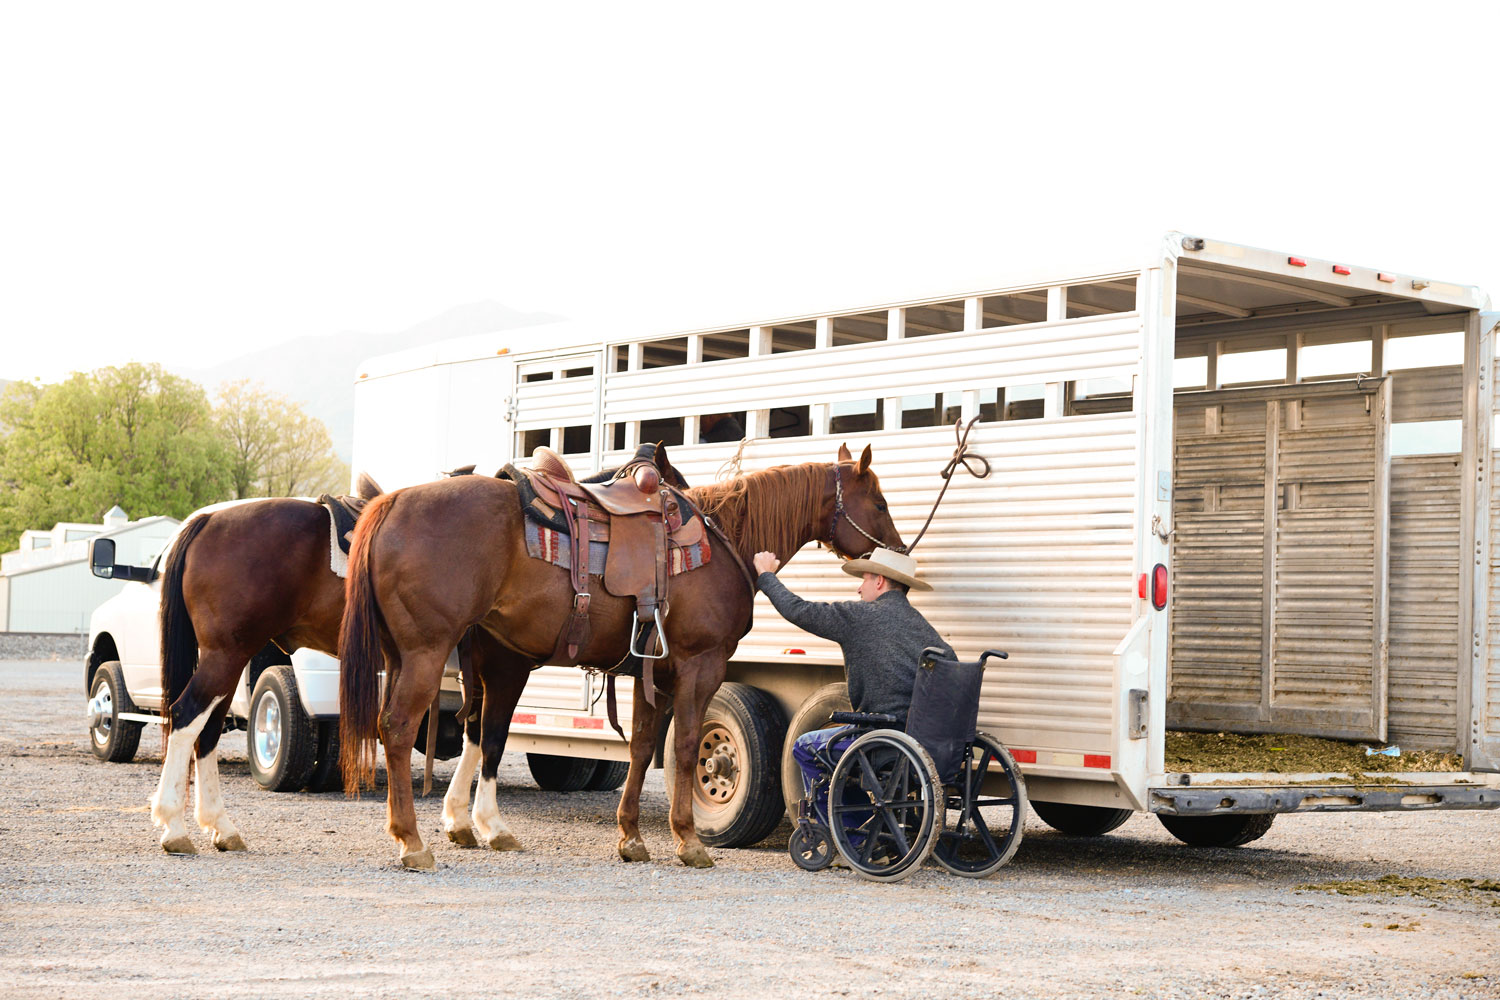  a photo of man using a wheelchair to attend to his horses